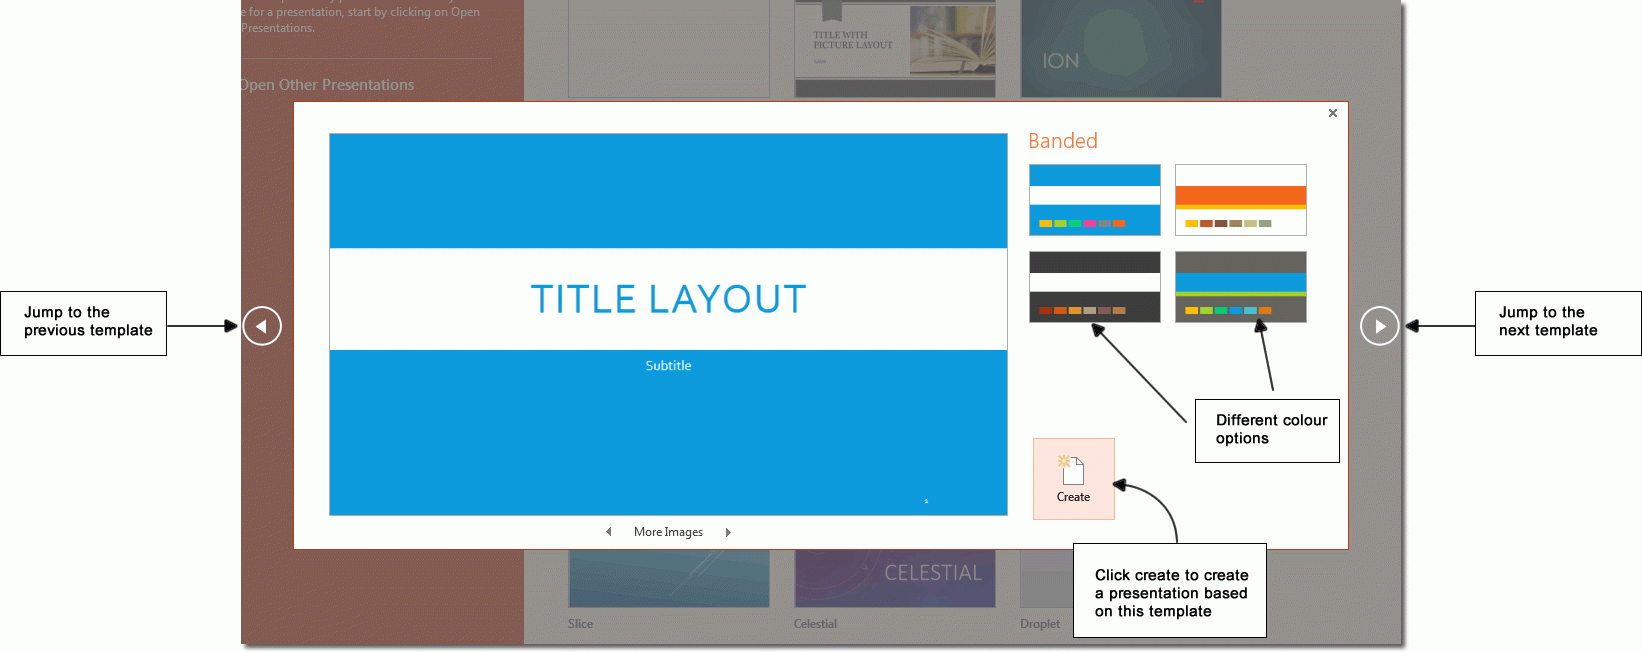 Microsoft Powerpoint 2013 Templates – Dalep.midnightpig.co Pertaining To Powerpoint 2013 Template Location